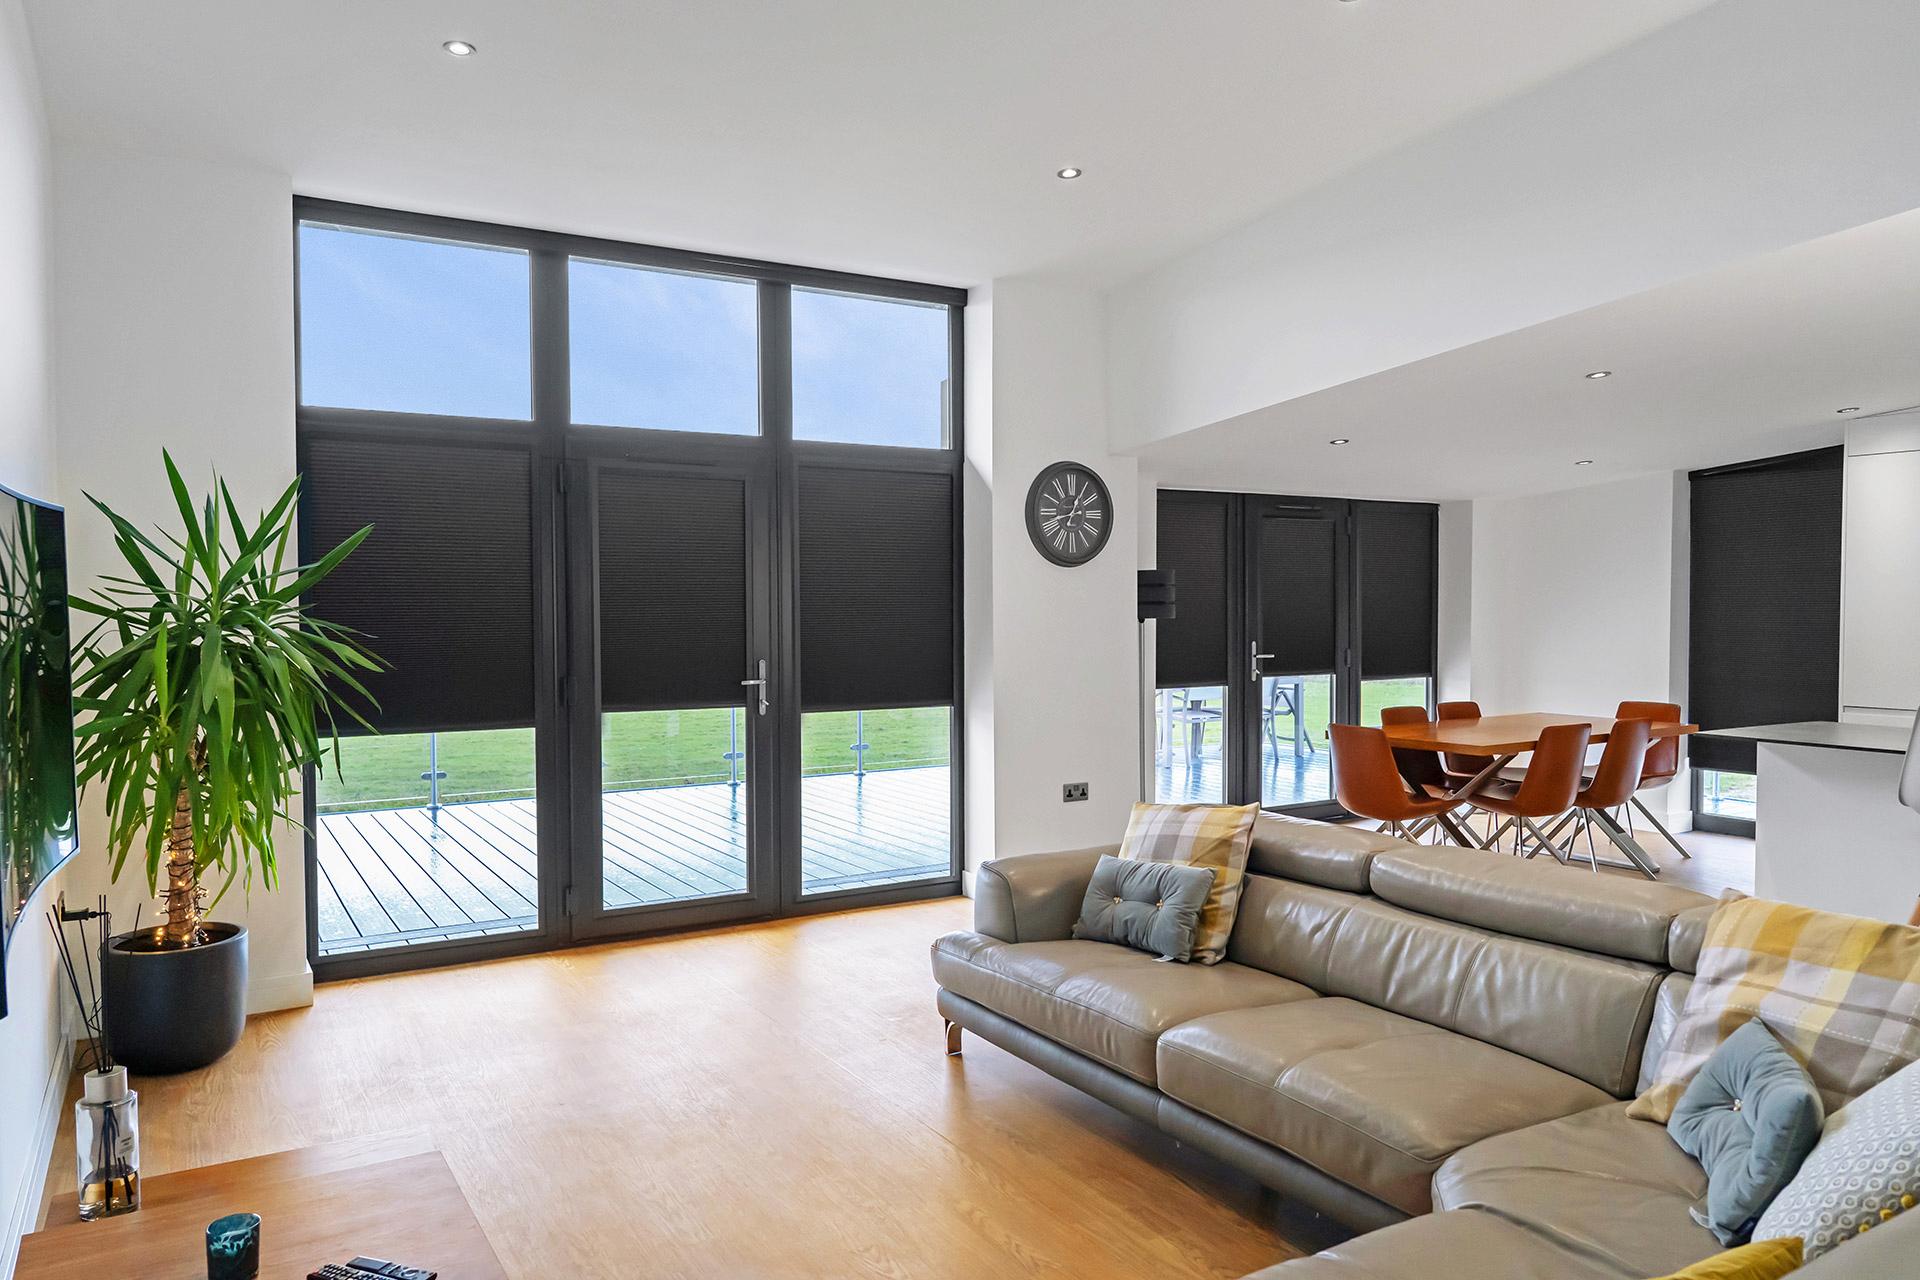 What Are The Benefits Of Using Electric Blinds?